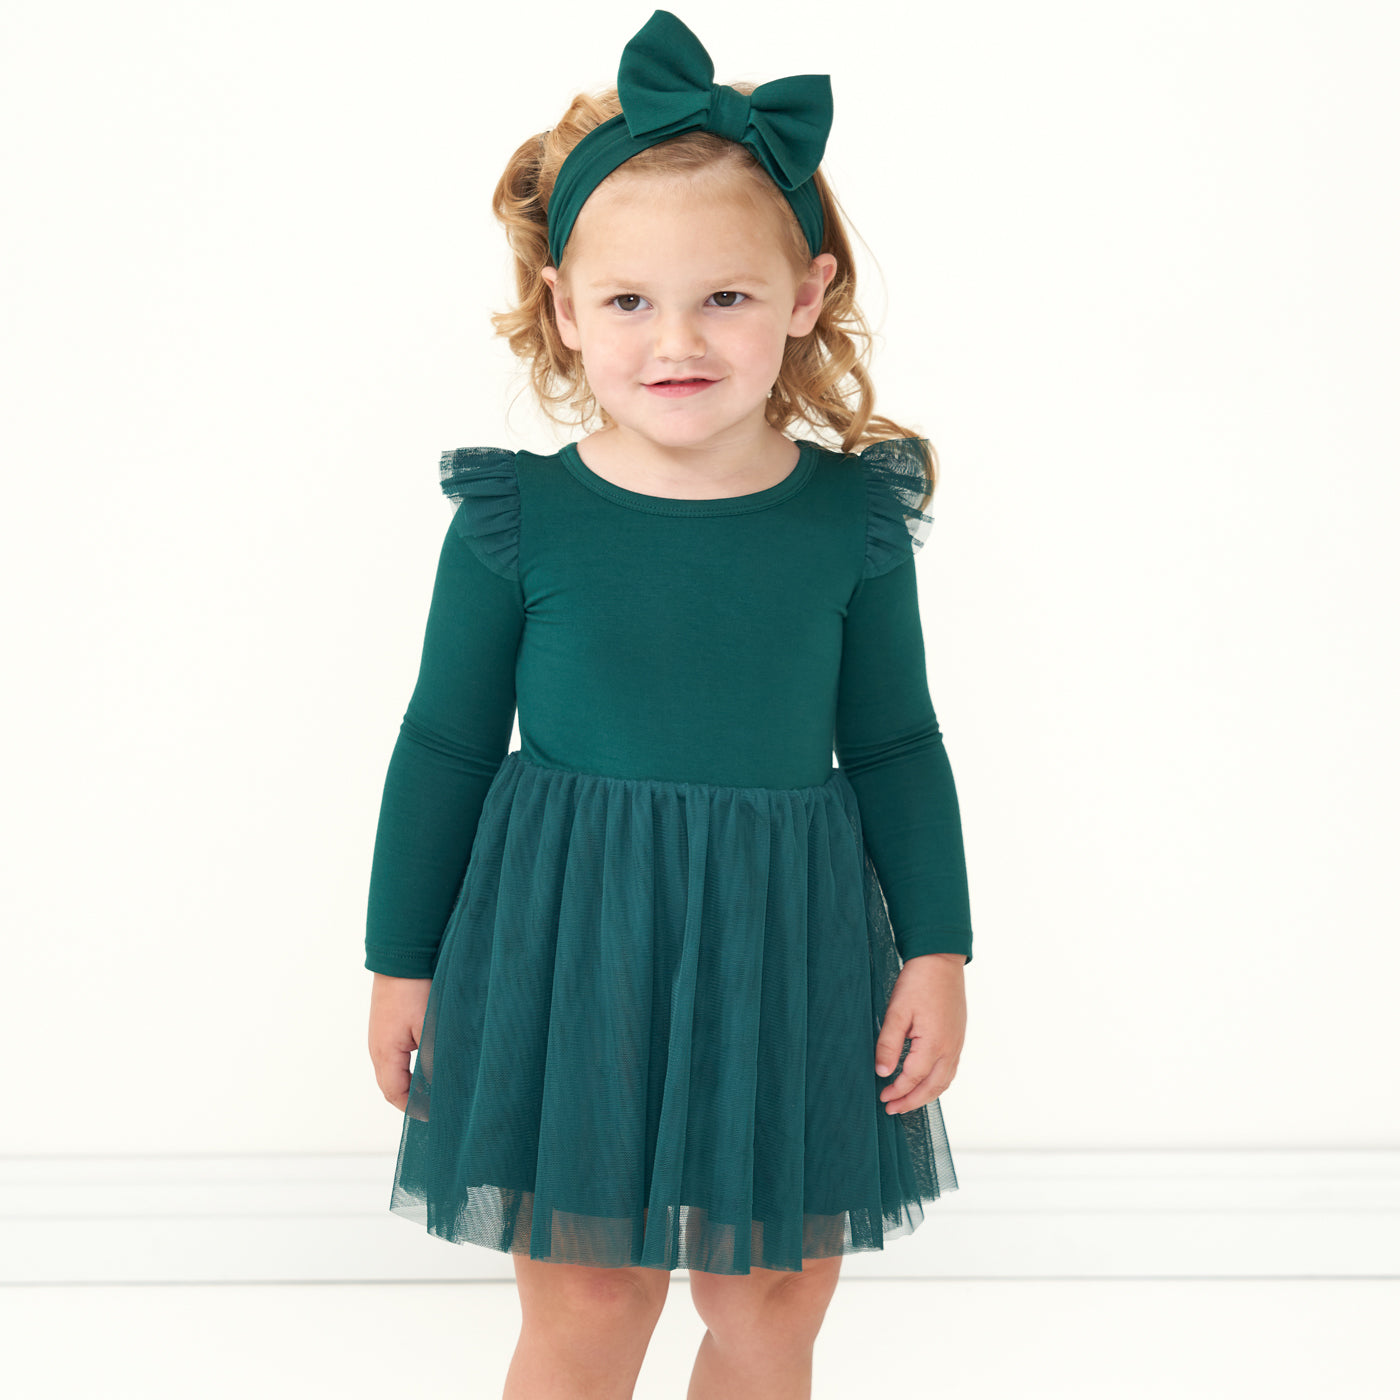 Child posing wearing an Emerald flutter tutu dress with bloomer paired with an Emerald luxe bow headband